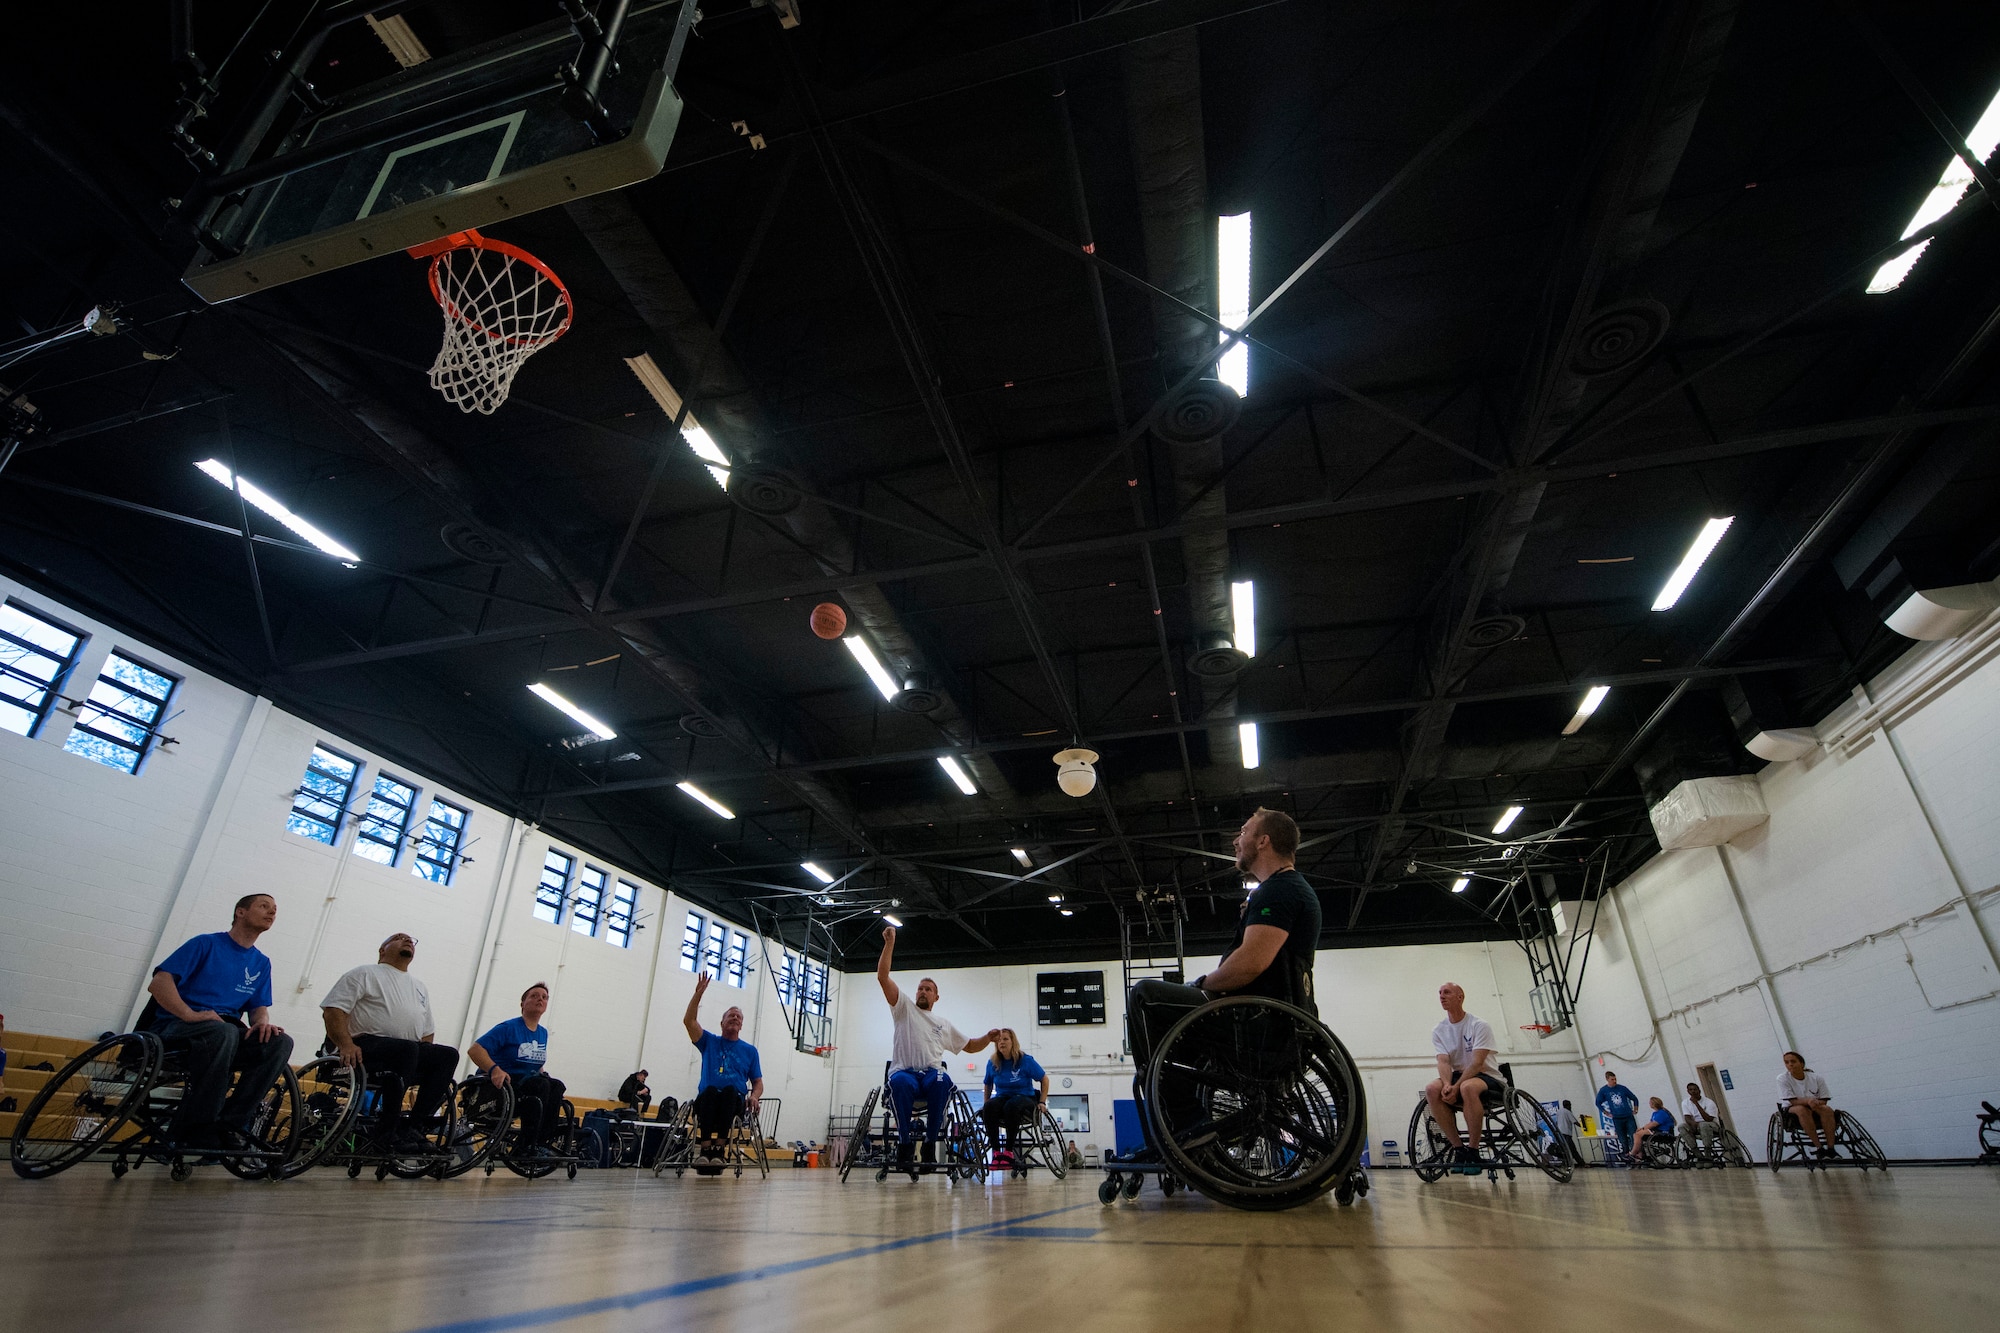 Scott Addington, retired U.S. Air Force member, shoots a free throw during a wheelchair basketball game at Joint Base Andrews, Md., Nov. 18, 2015. The game is part of a weeklong Northeast Region Warrior CARE Event in conjunction with Warrior Care Month, dedicated to honoring wounded, ill and injured service members, their families and their caregivers. (U.S. Air Force photo/Airman 1st Class Philip Bryant)